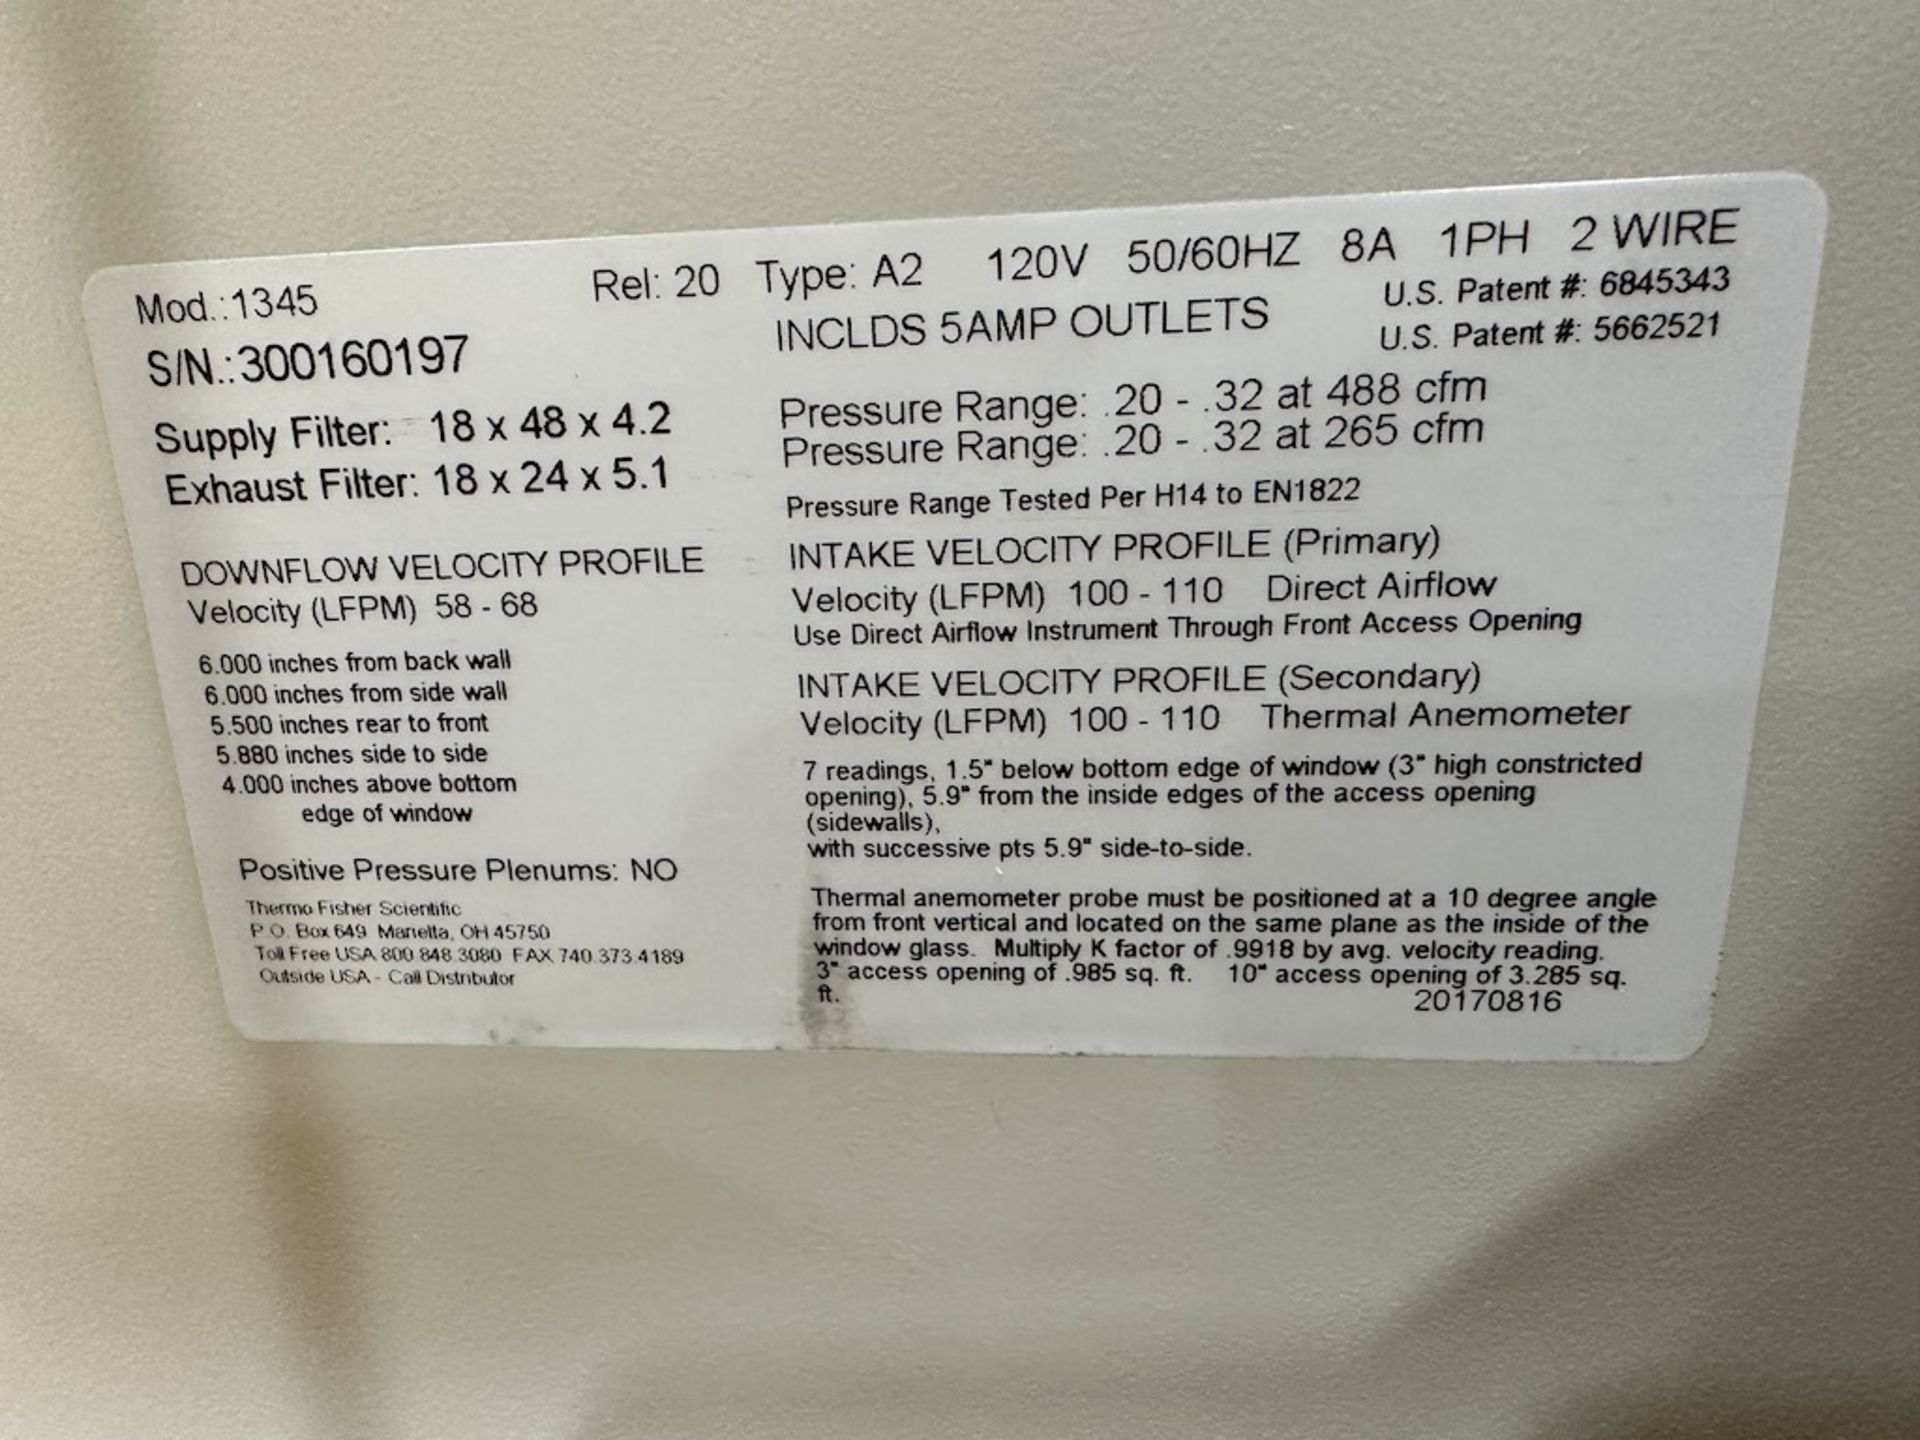 Thermo Scientific 1300 Series A2 Biological Safety Cabinet Model 1345 s/n 300160197 - Image 2 of 2